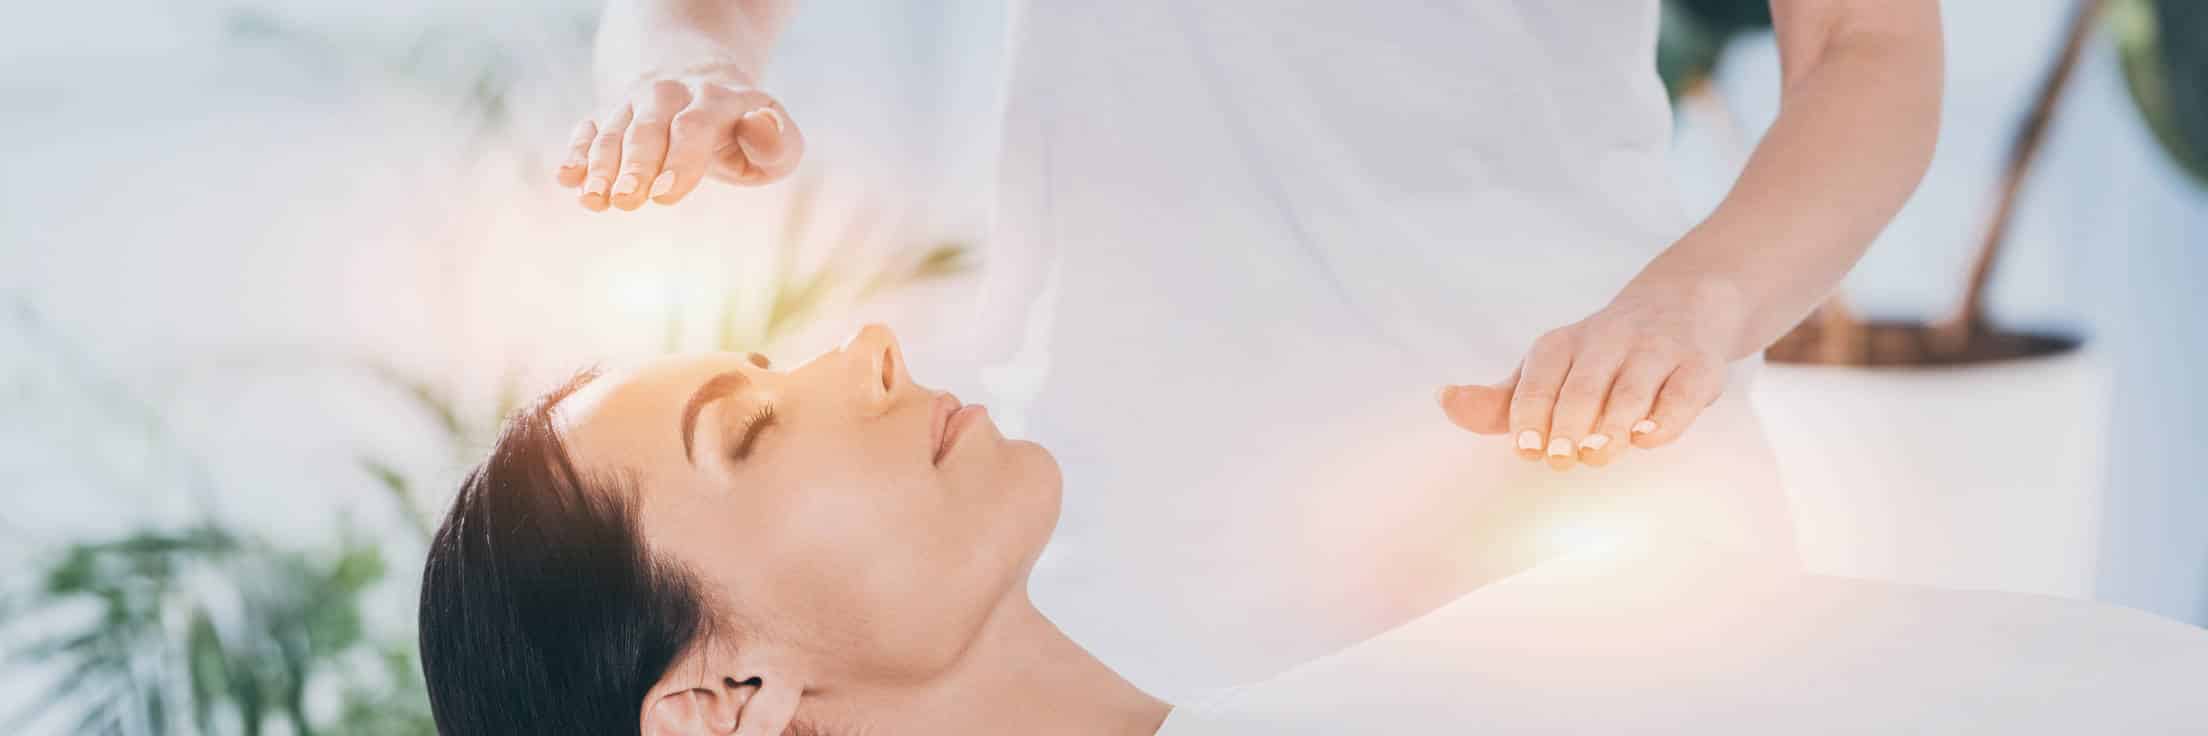 Fight stress with Reiki, heal the body